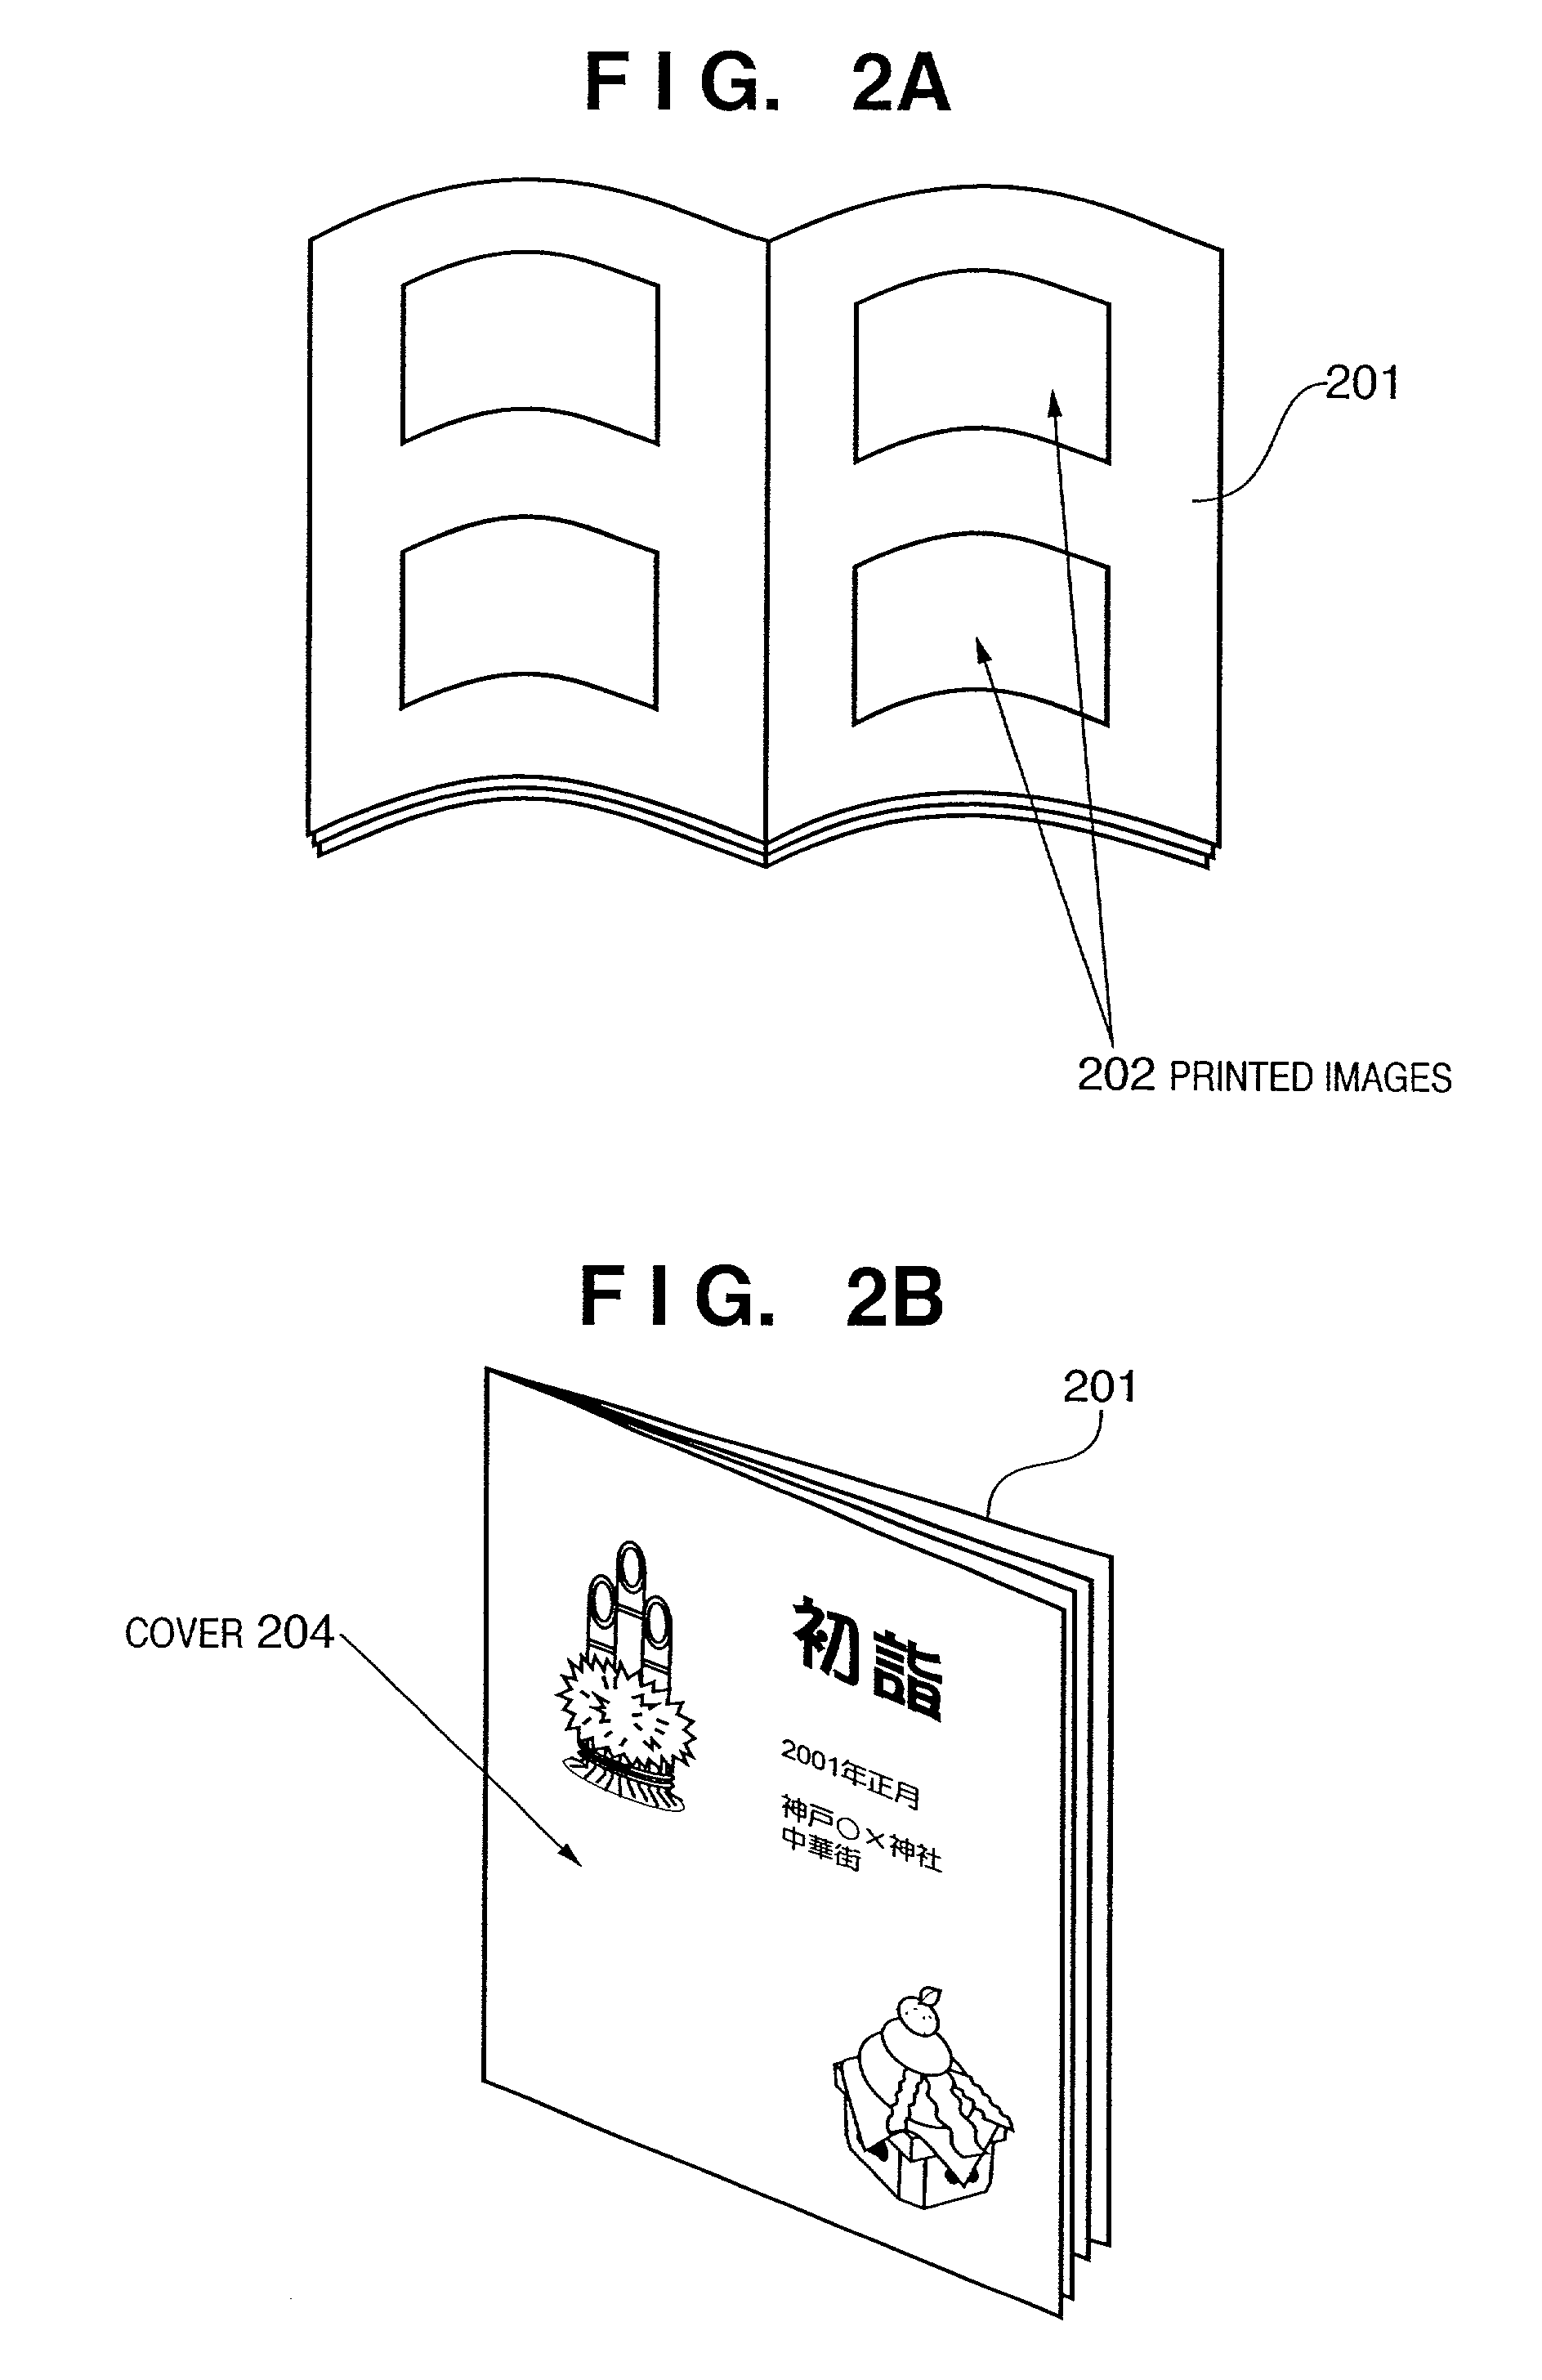 Image processing apparatus and method utilized to generate cover image